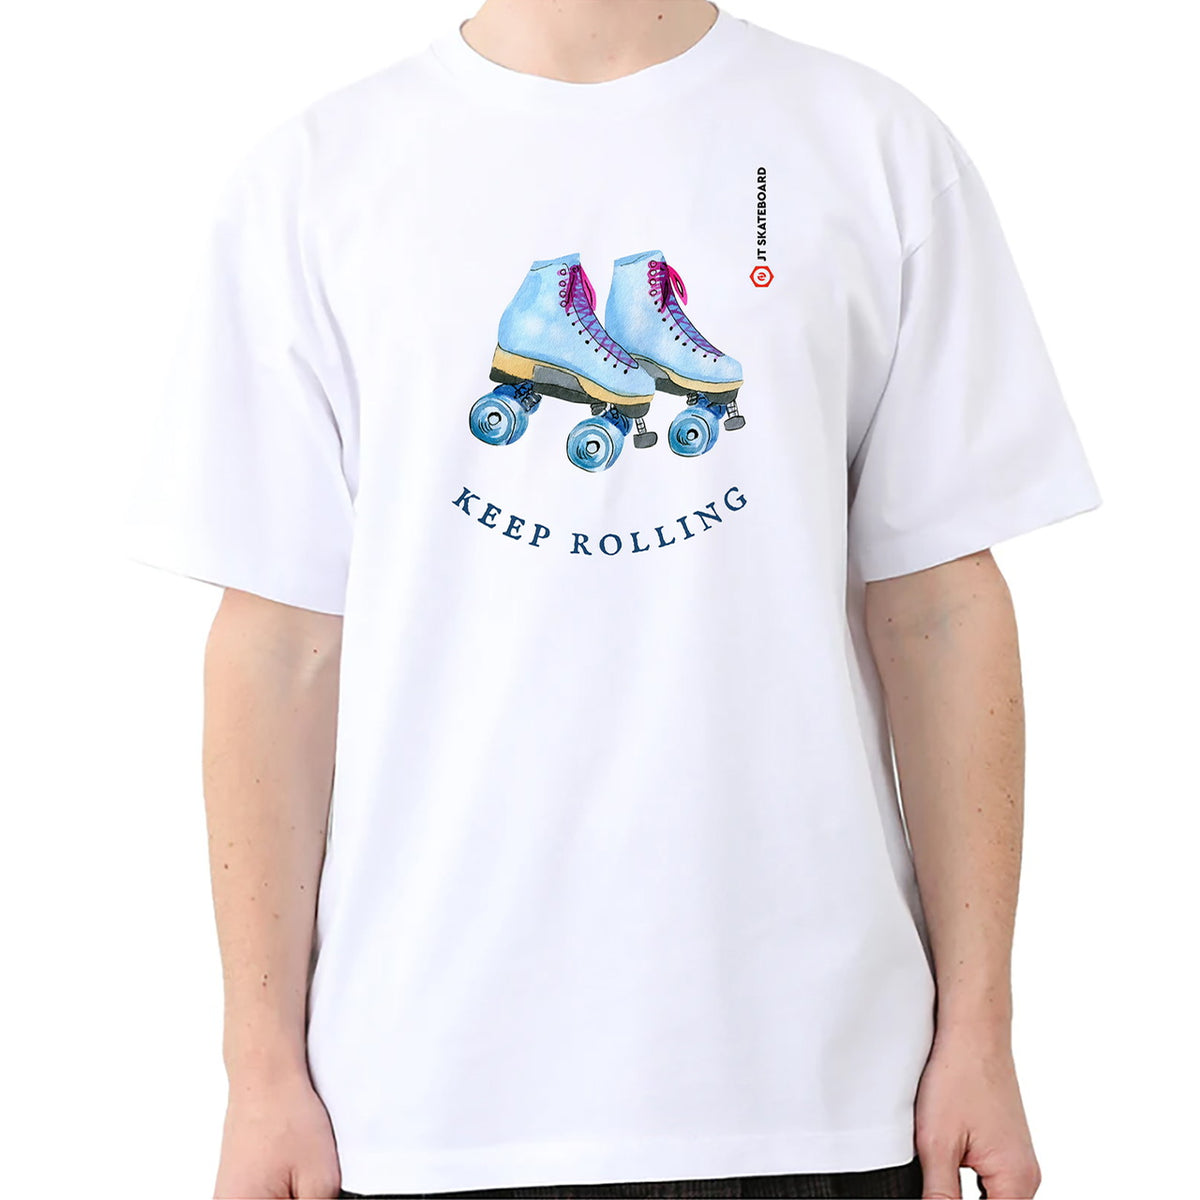 Keep Rolling | Relaxed Loose Fitting T-Shirts - JT Skateboard - JT Skateboard